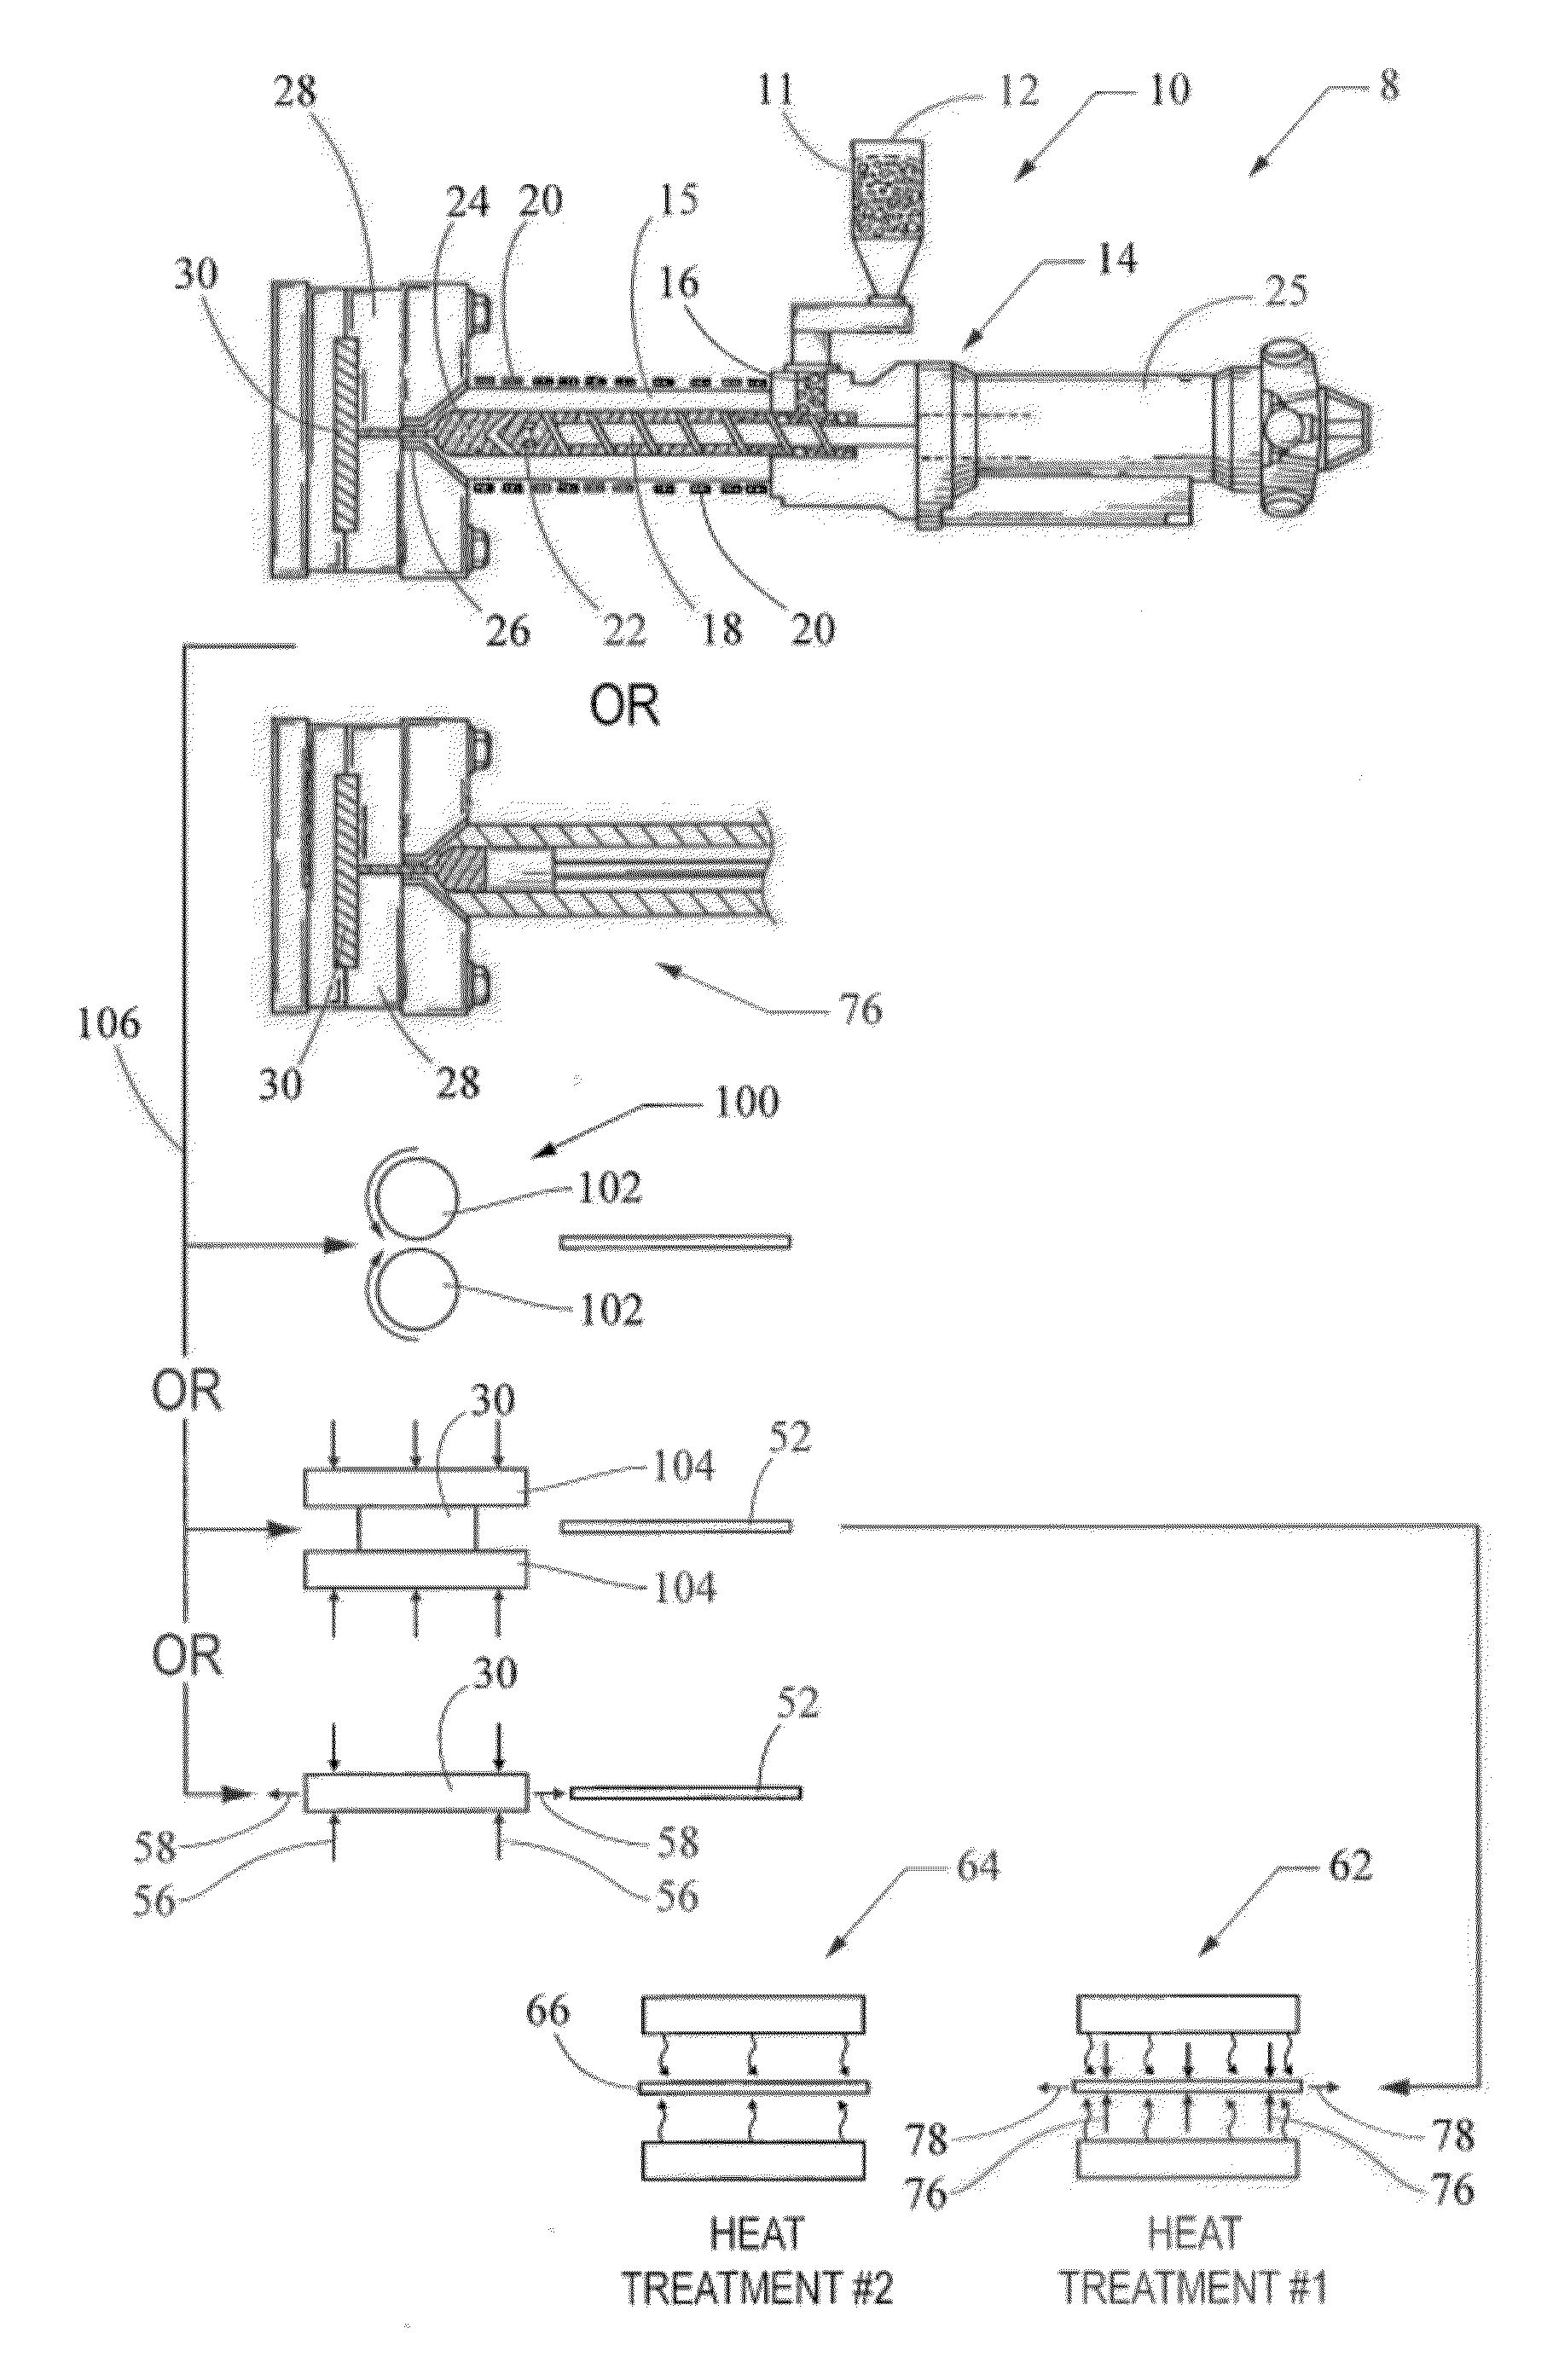 Method and apparatus of forming a wrought material having a refined grain structure